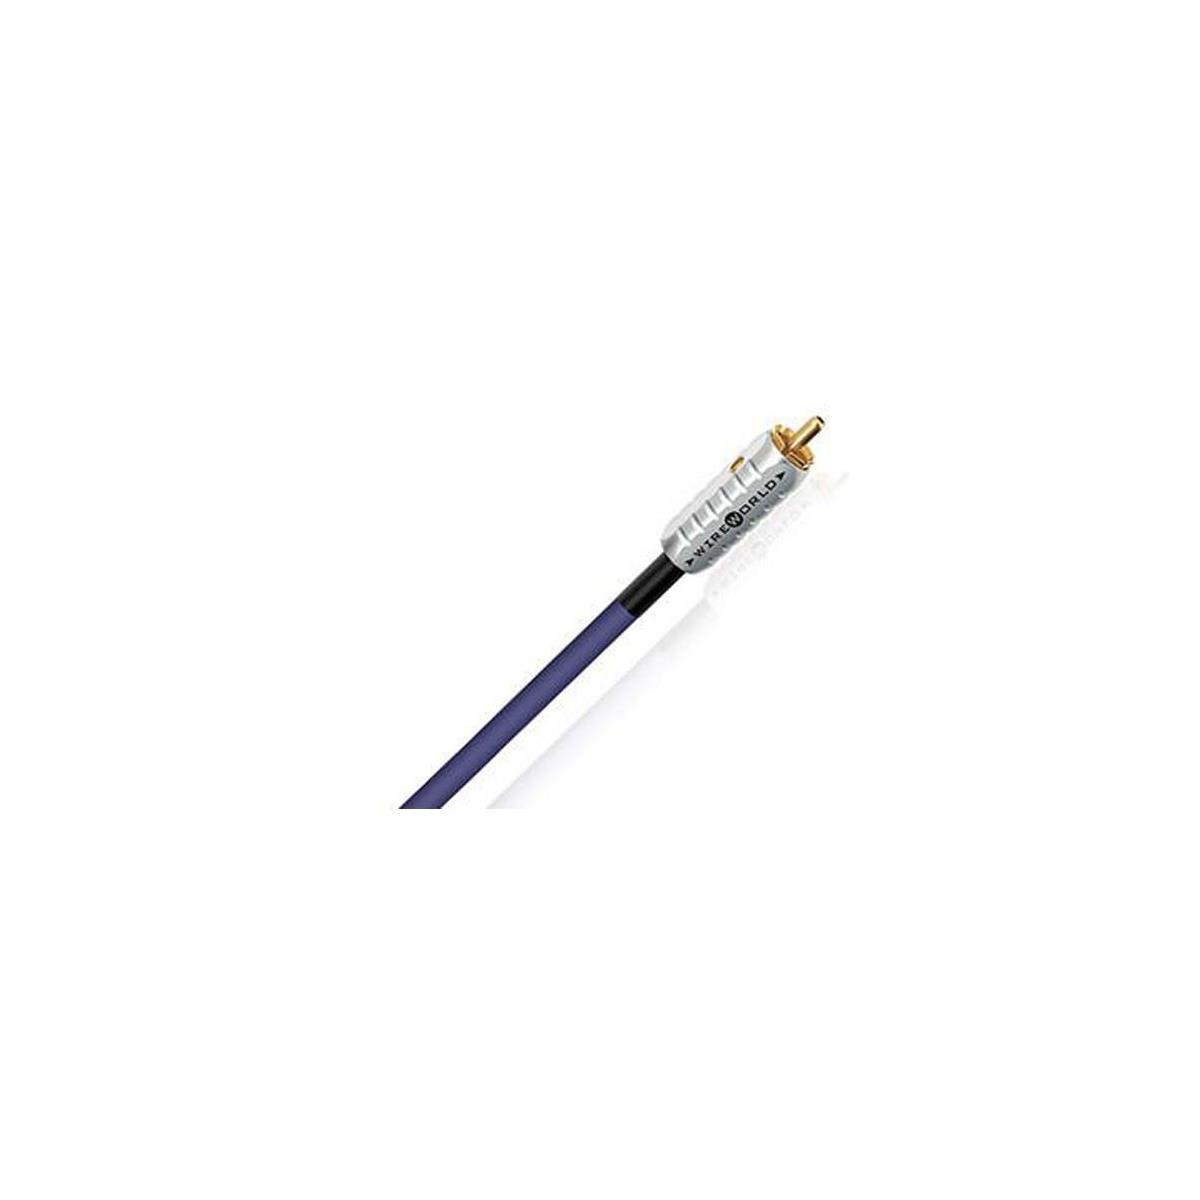 

WireWorld Ultraviolet (UVV) Coaxial Digital Audio Cable, 3.3' (1.0m)